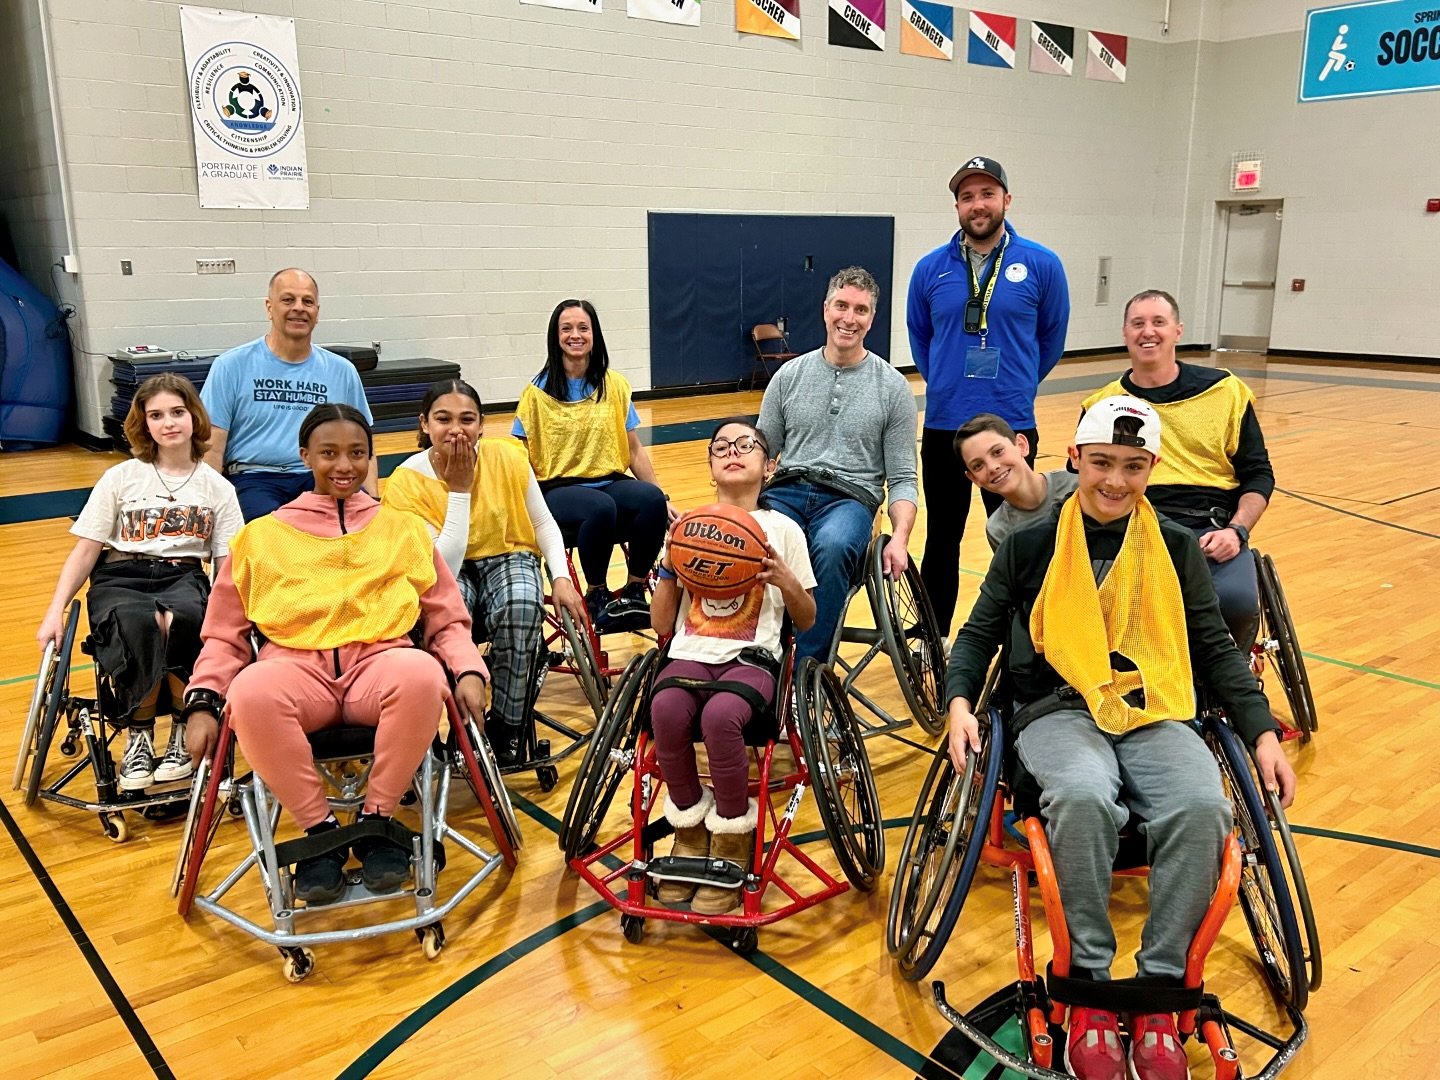 Had a great time recently while learning from Coach Phil of Synergy Adaptive Athletics! Wheelchair sports are super challenging and super fun. Our students and staff benefited from the discussions and inclusive activity. 💪